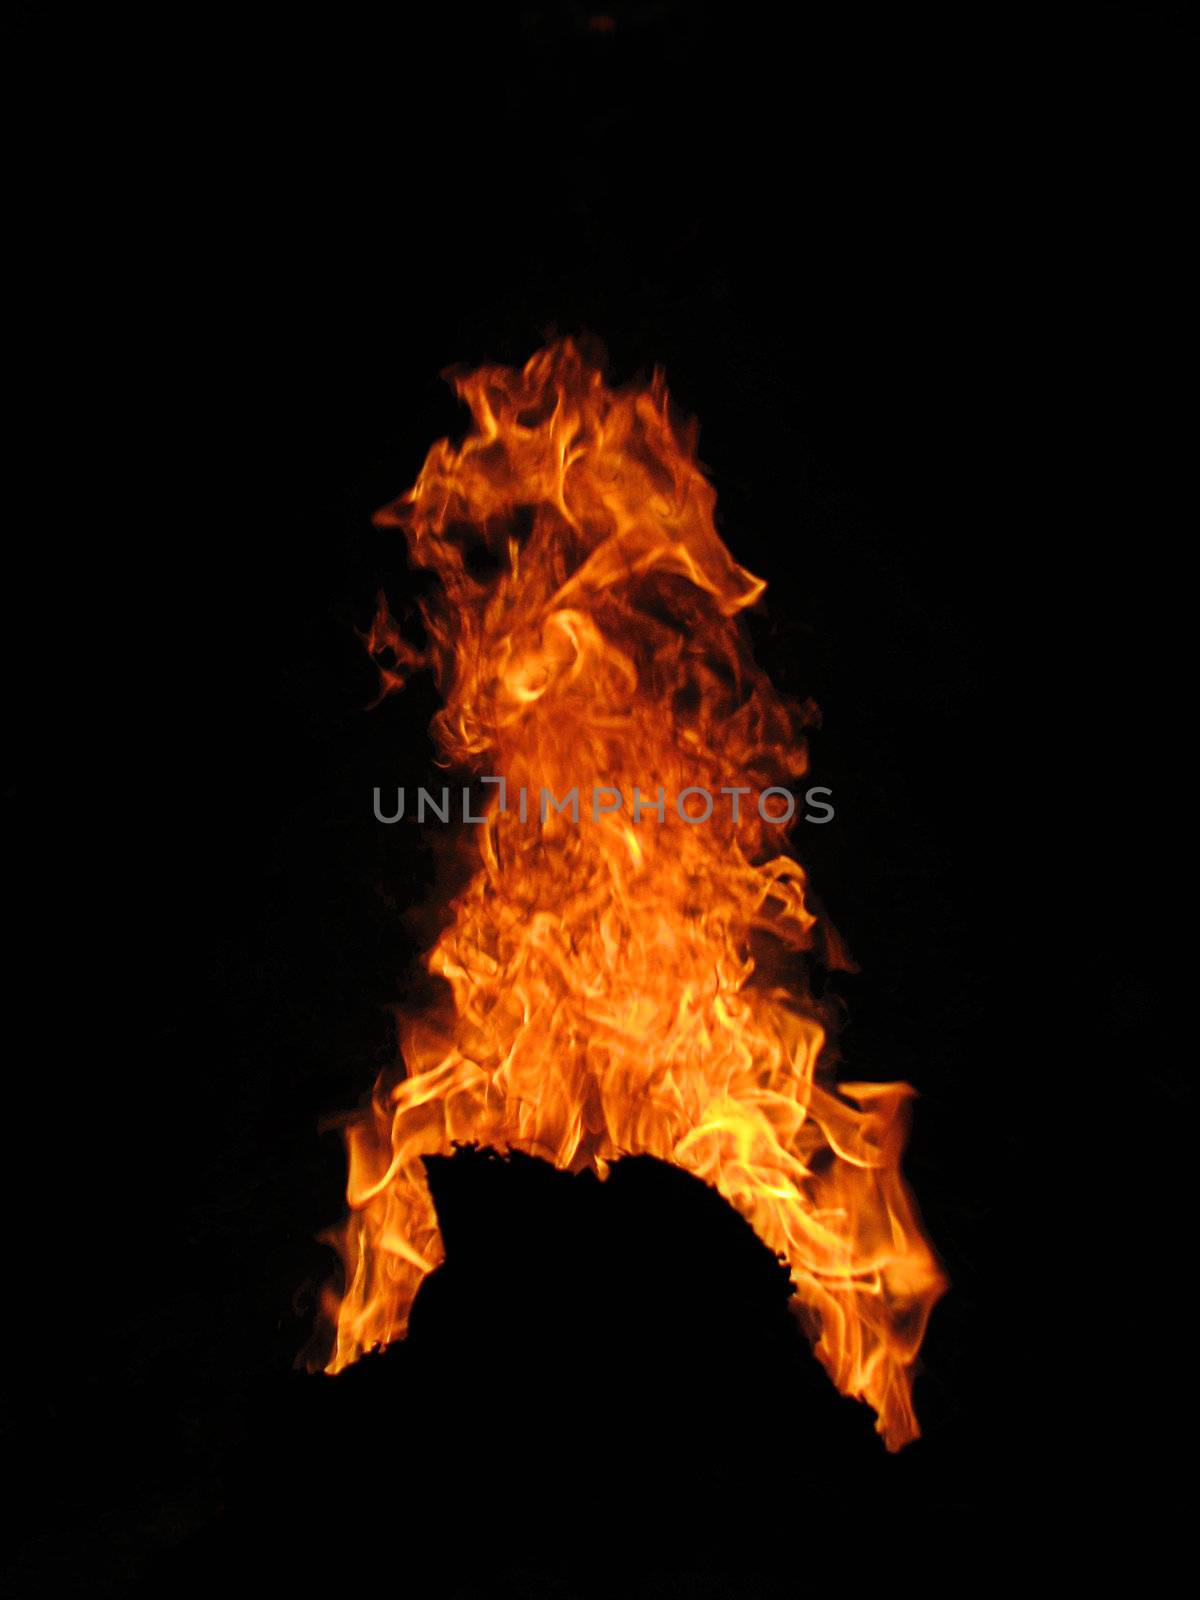 The close-up of a flame for a background